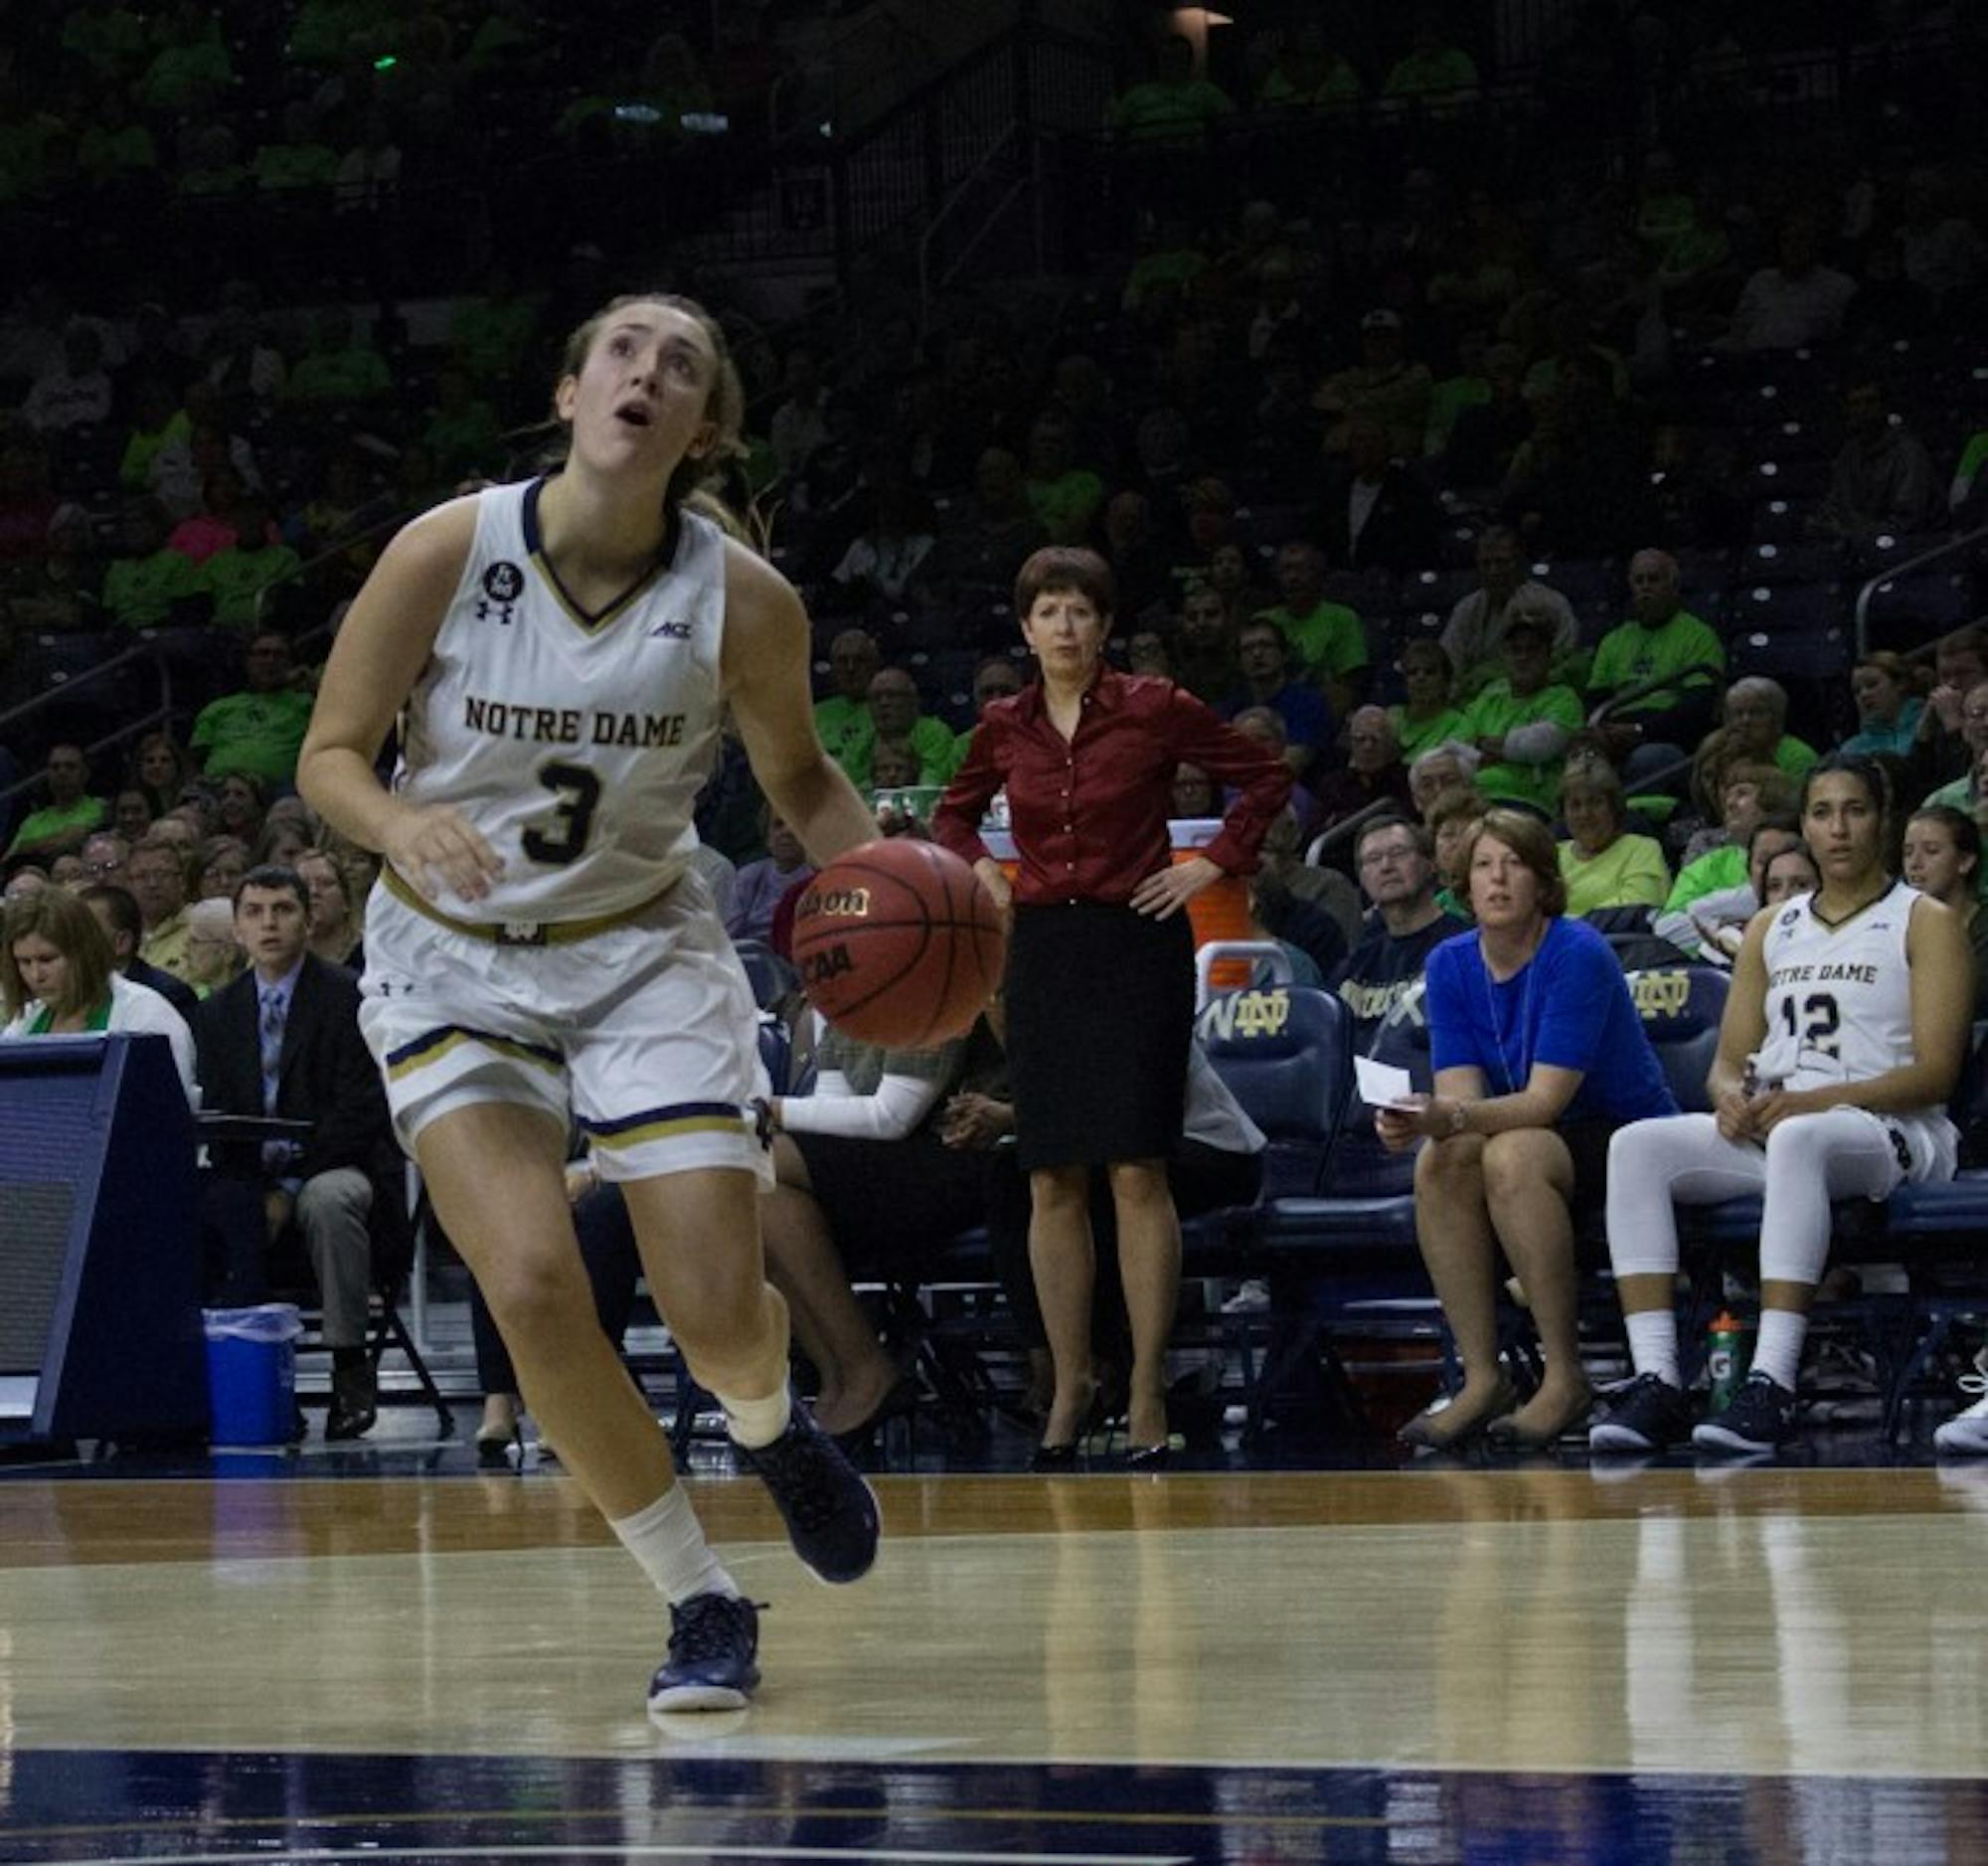 Freshman guard Marina Mabrey looks to shoot during Notre Dame’s 74-39 victory over Toledo on Nov. 18 at Purcell Pavilion.